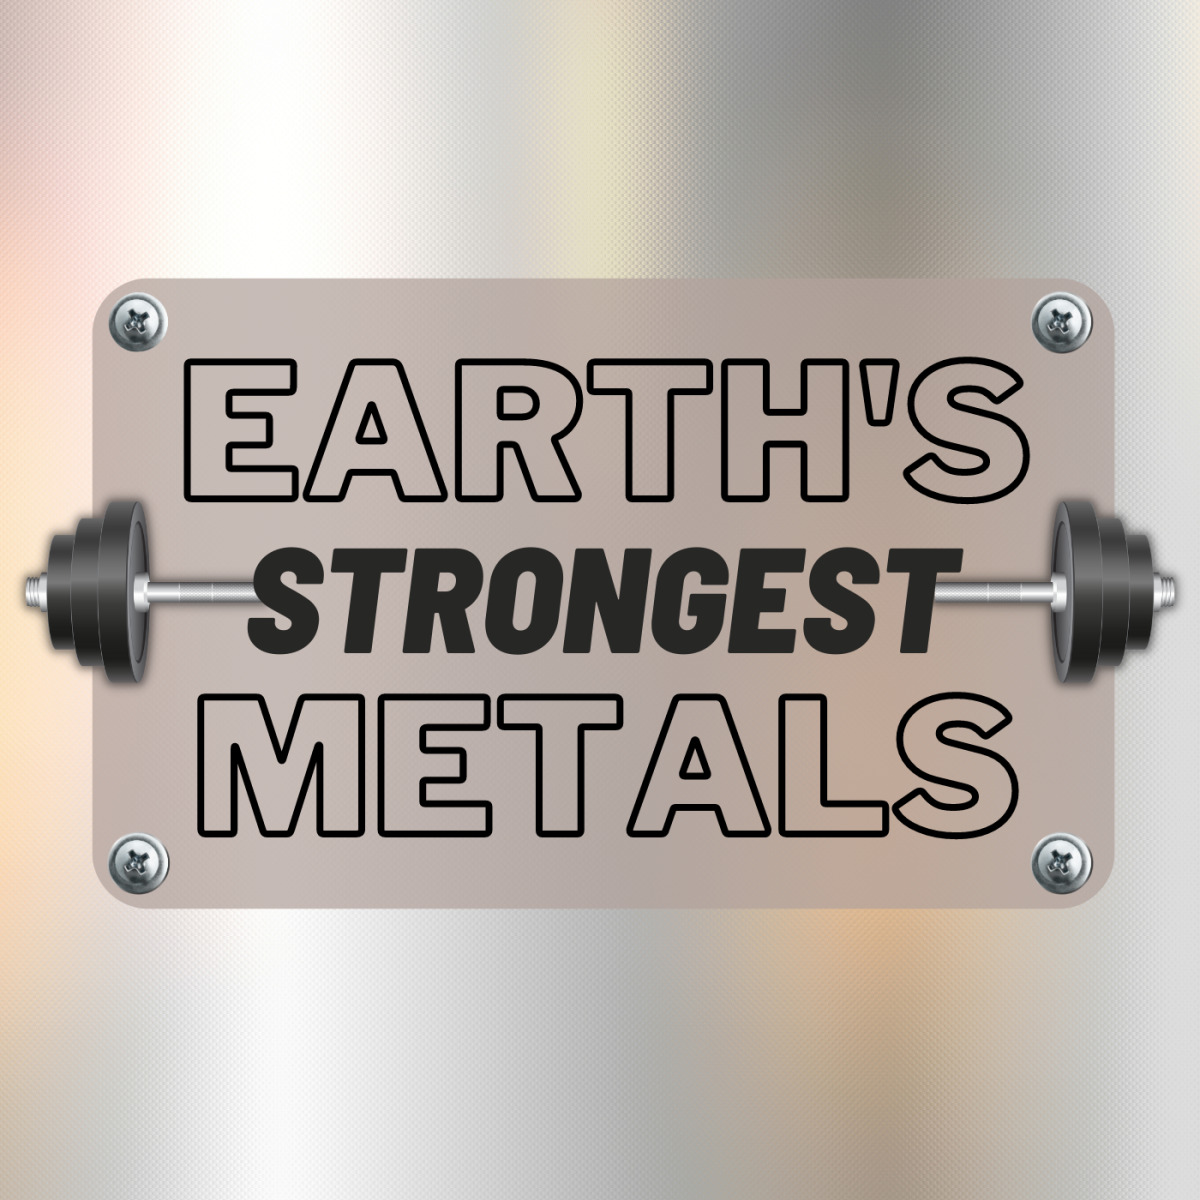 What are Earth's strongest metals?